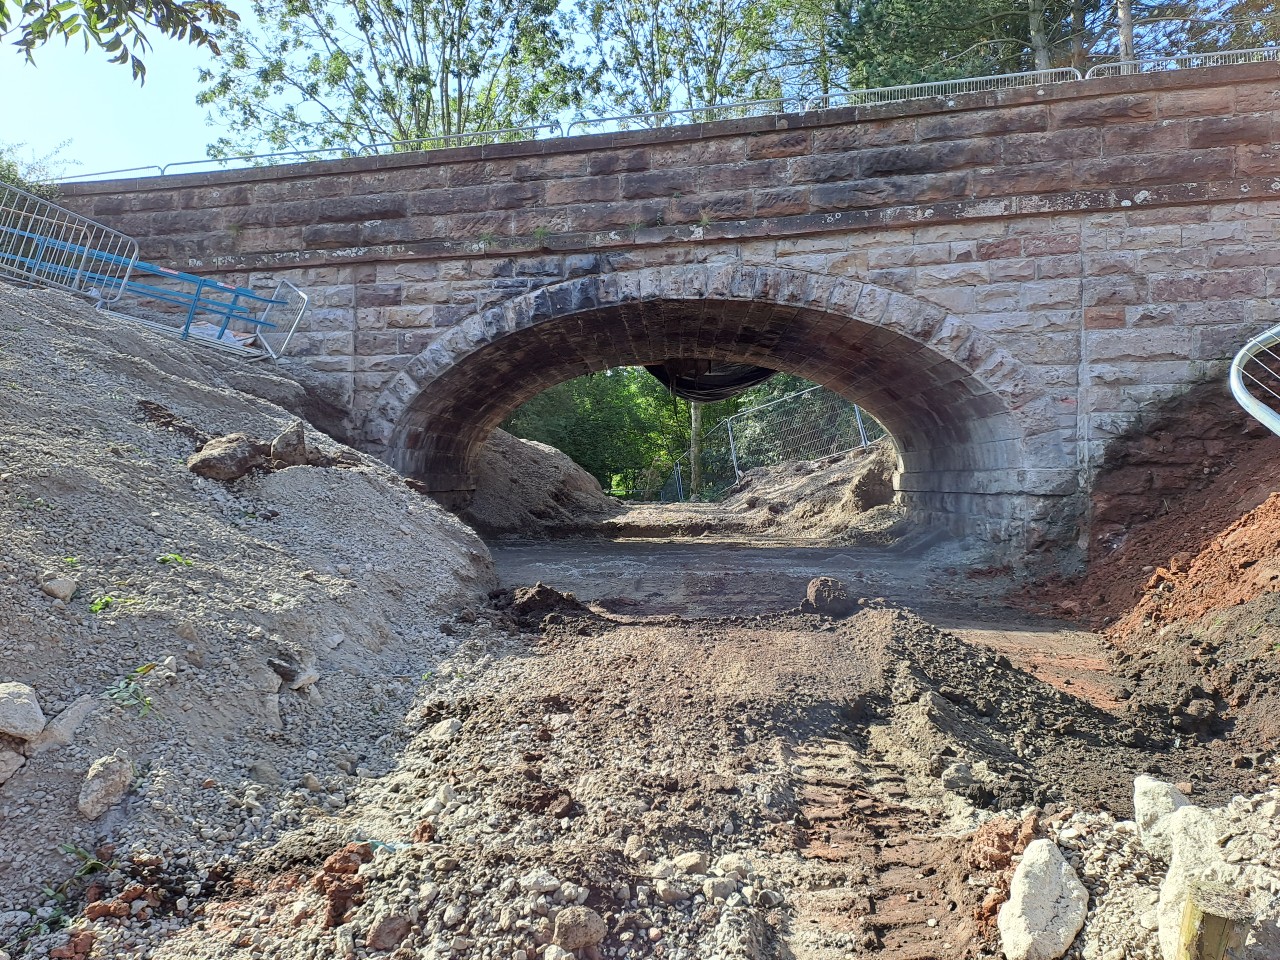 View of the arch where work has started to remove the fill material between the abutments and embankments.